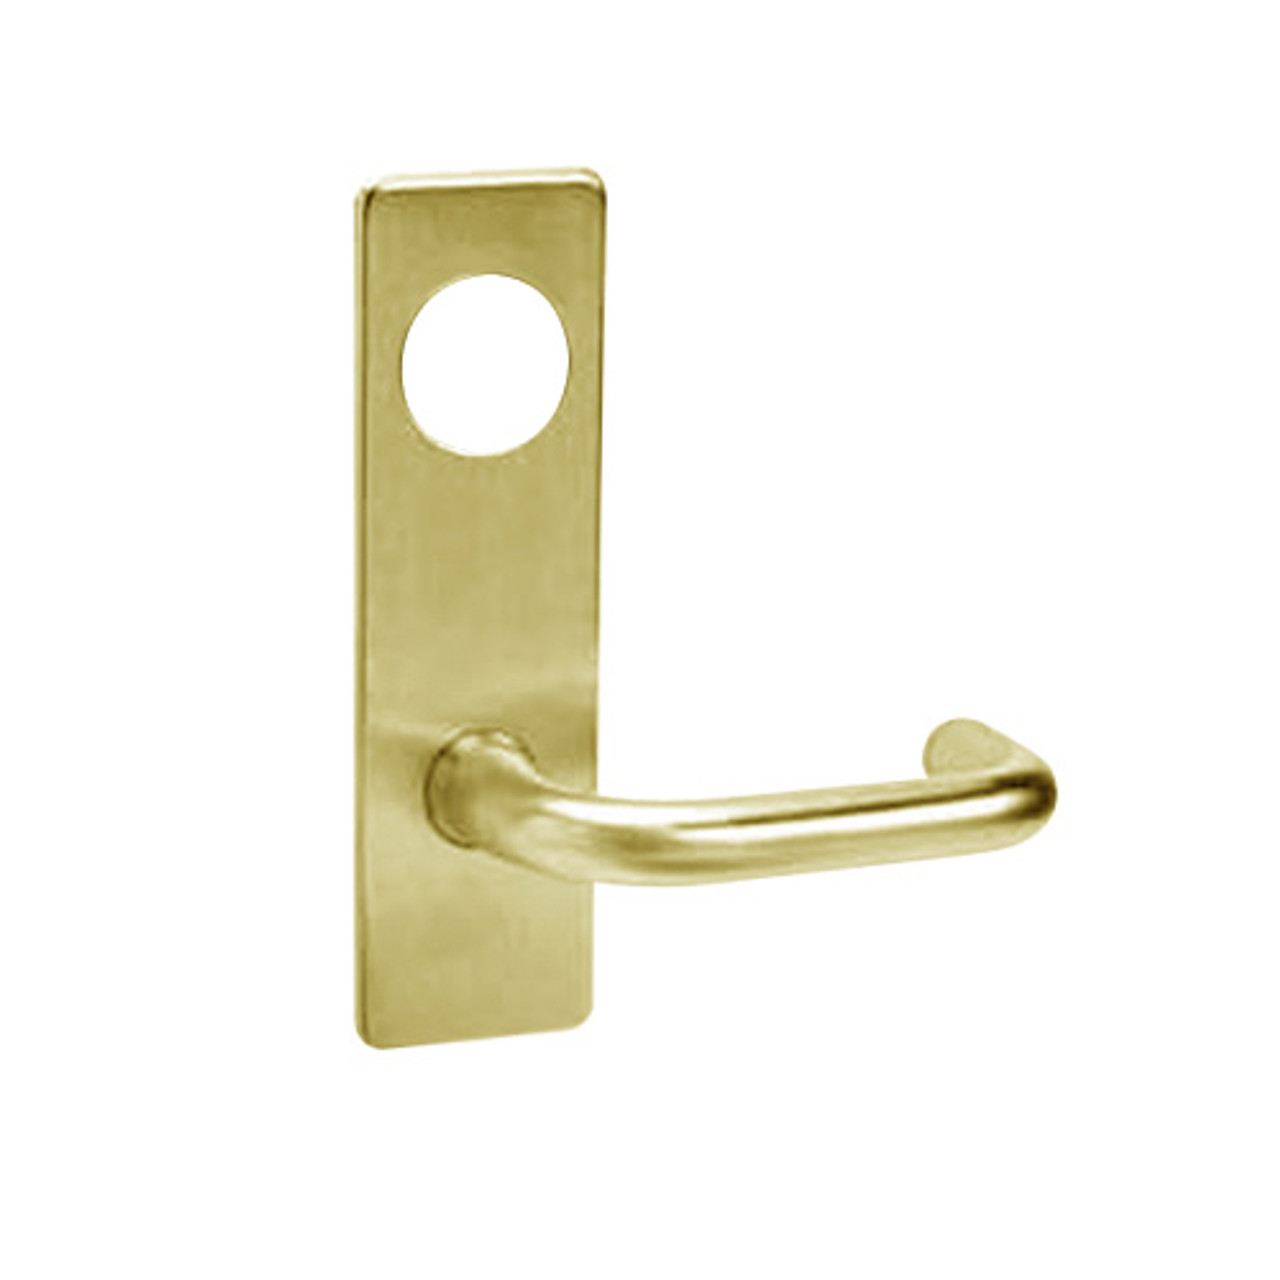 ML2059-LWN-606-M31 Corbin Russwin ML2000 Series Mortise Security Storeroom Trim Pack with Lustra Lever in Satin Brass